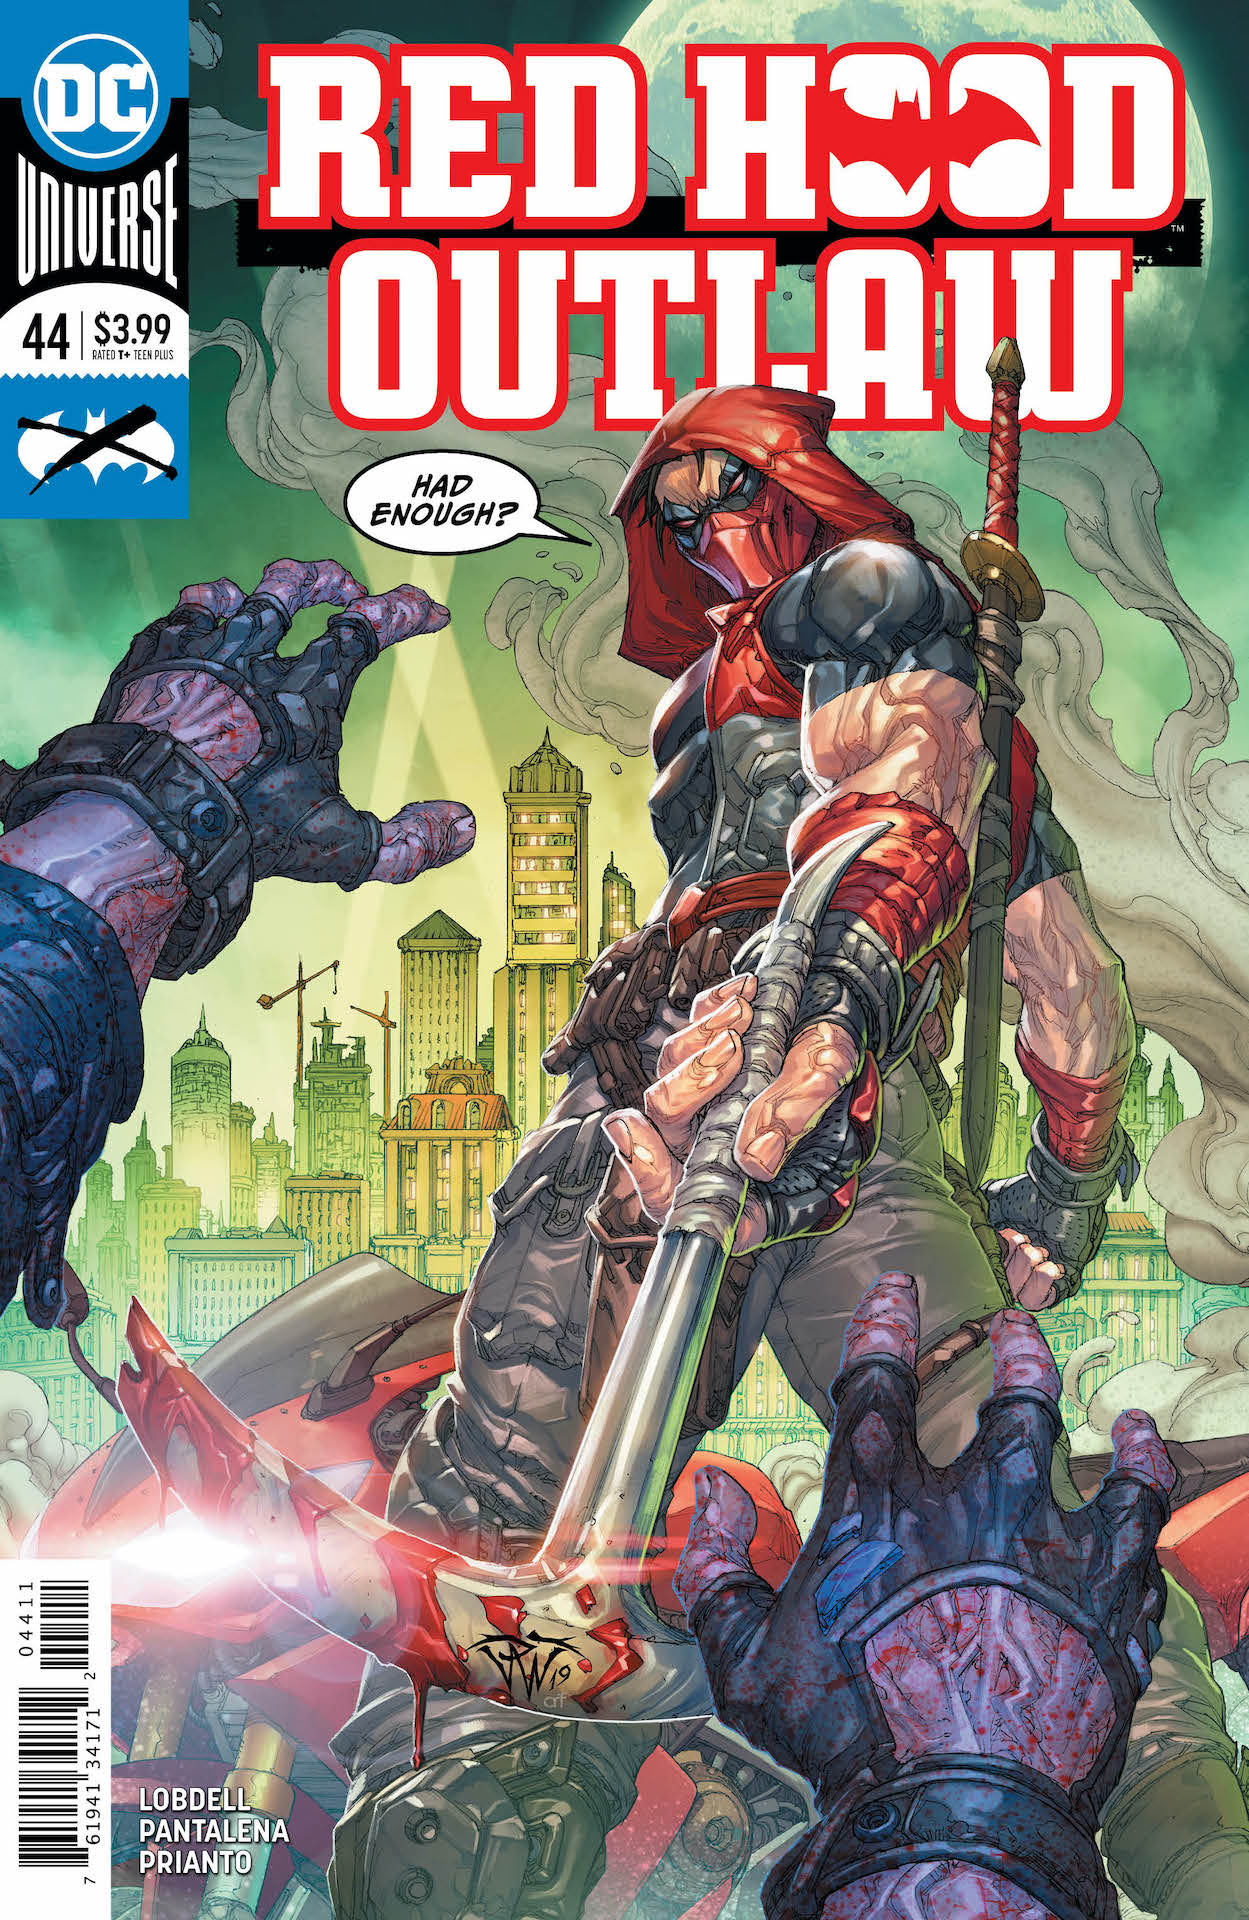 DC Preview: Red Hood: Outlaw #44